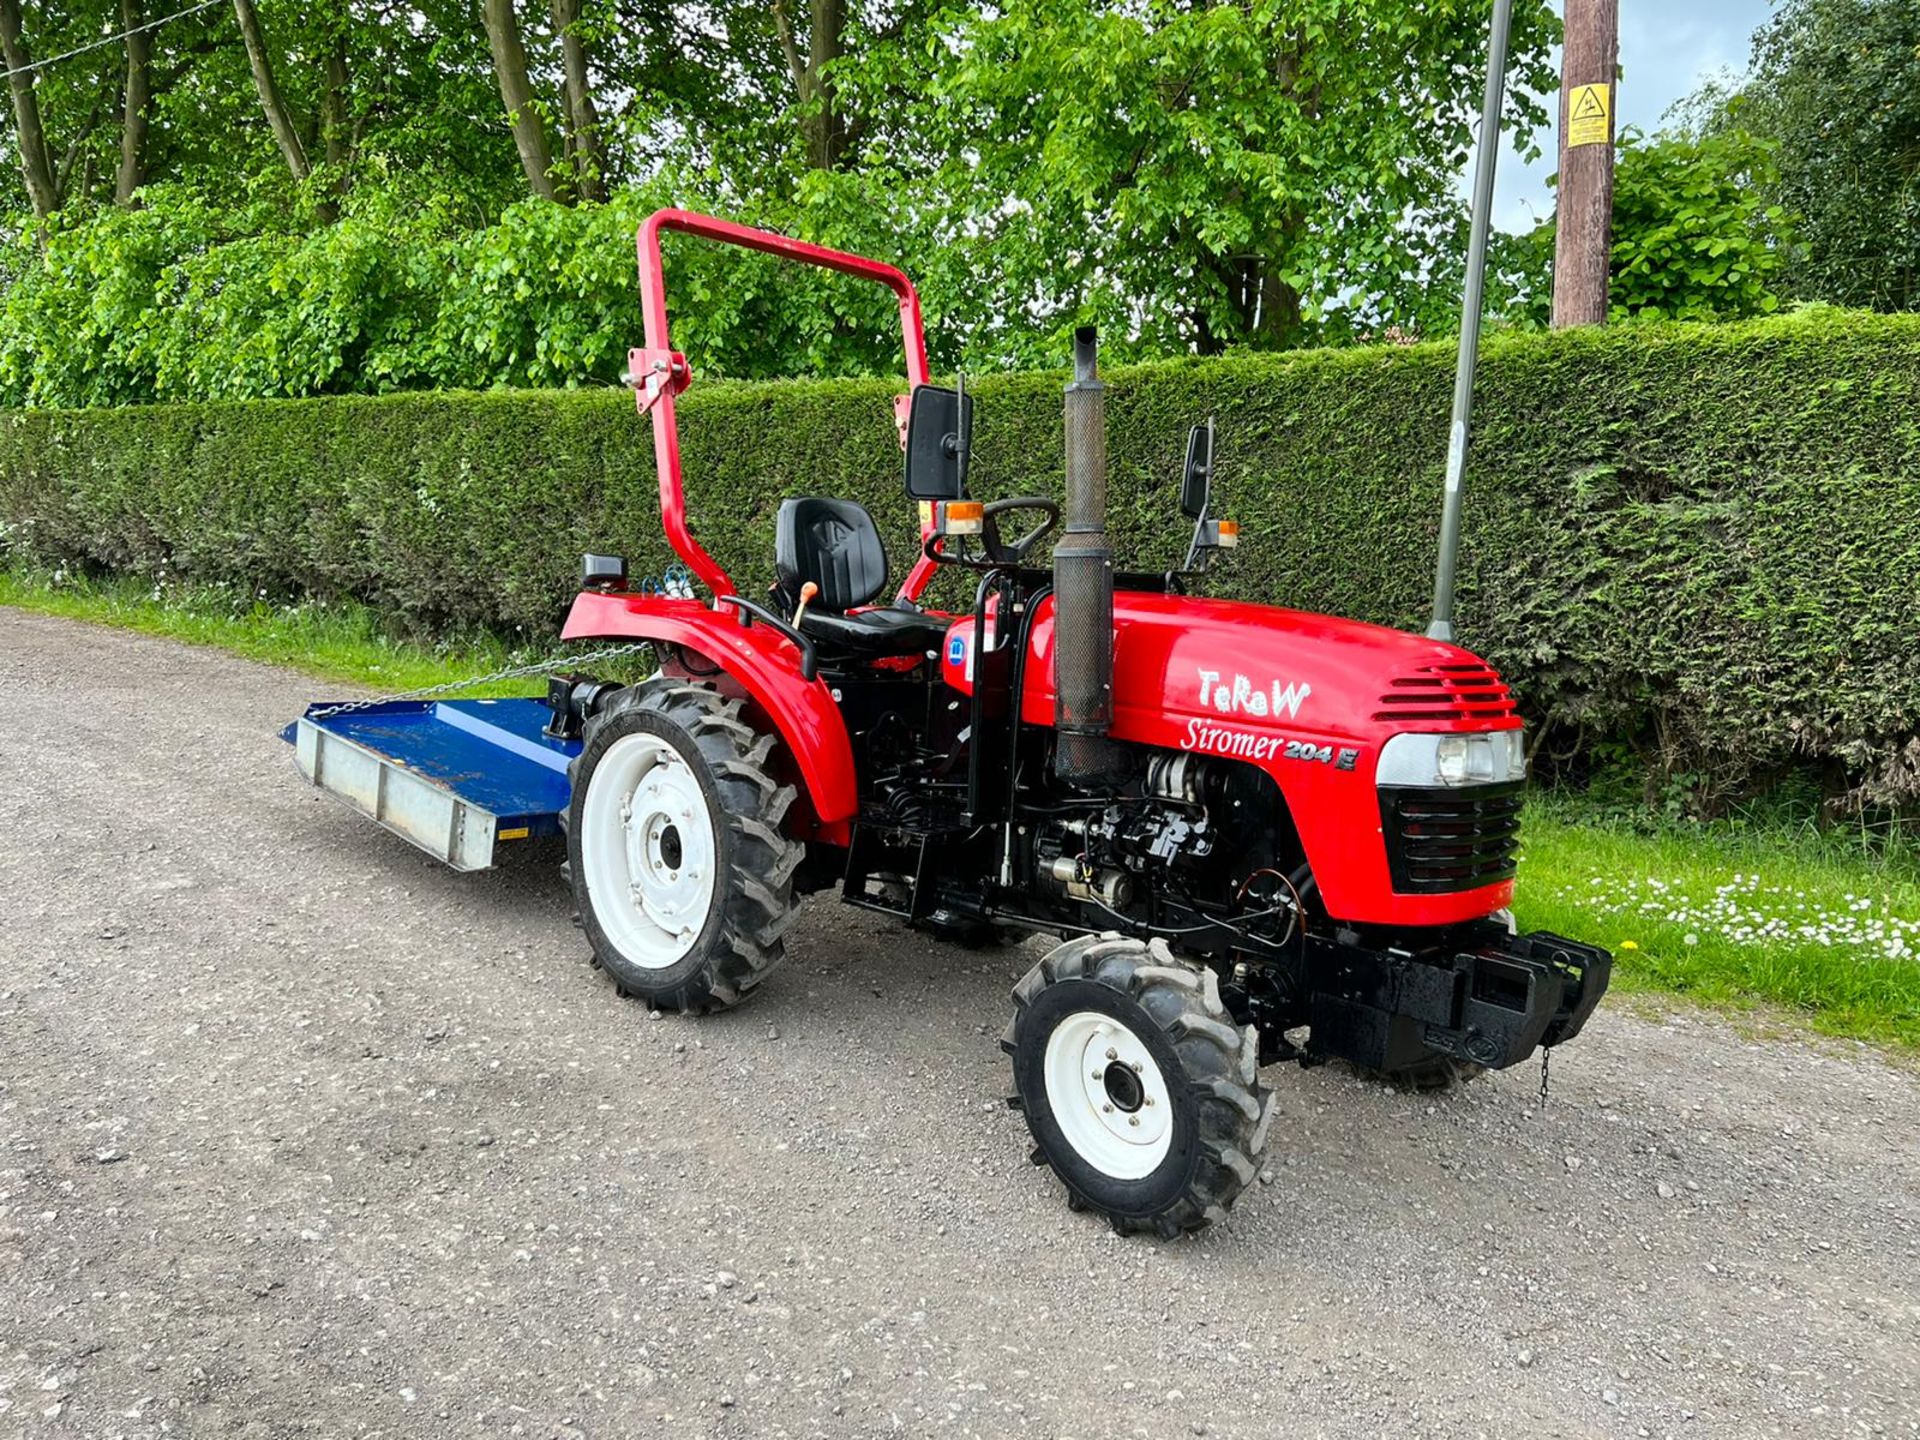 Siromer 204E 20HP 4WD Compact Tractor With 5FT Beaco Grass Topper - 68 Plate """"PLUS VAT"""" - Image 2 of 22